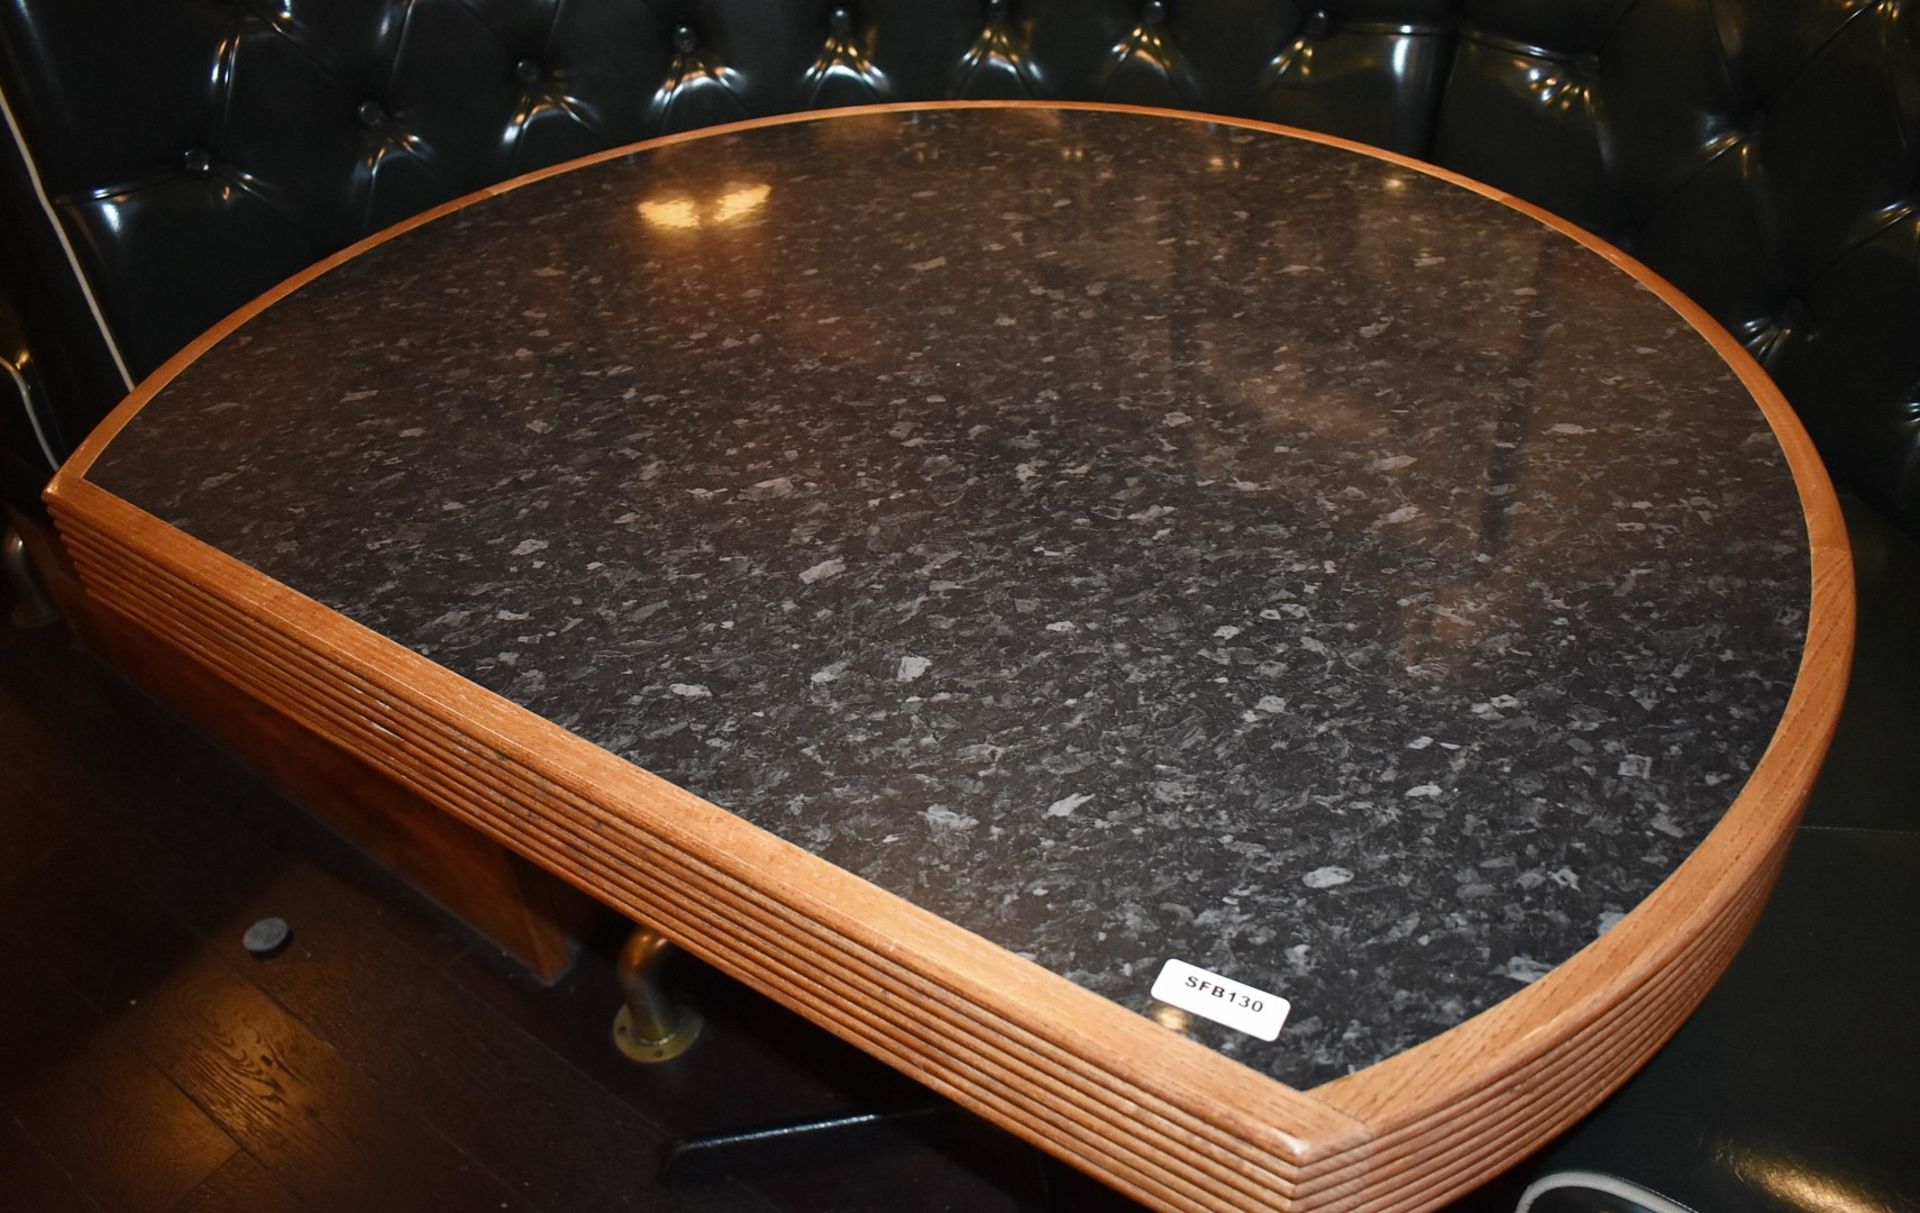 1 x Restaurant Semi-Circle Dining Table With Granite Style Surface, Wooden Edging and Cast Iron - Image 2 of 3